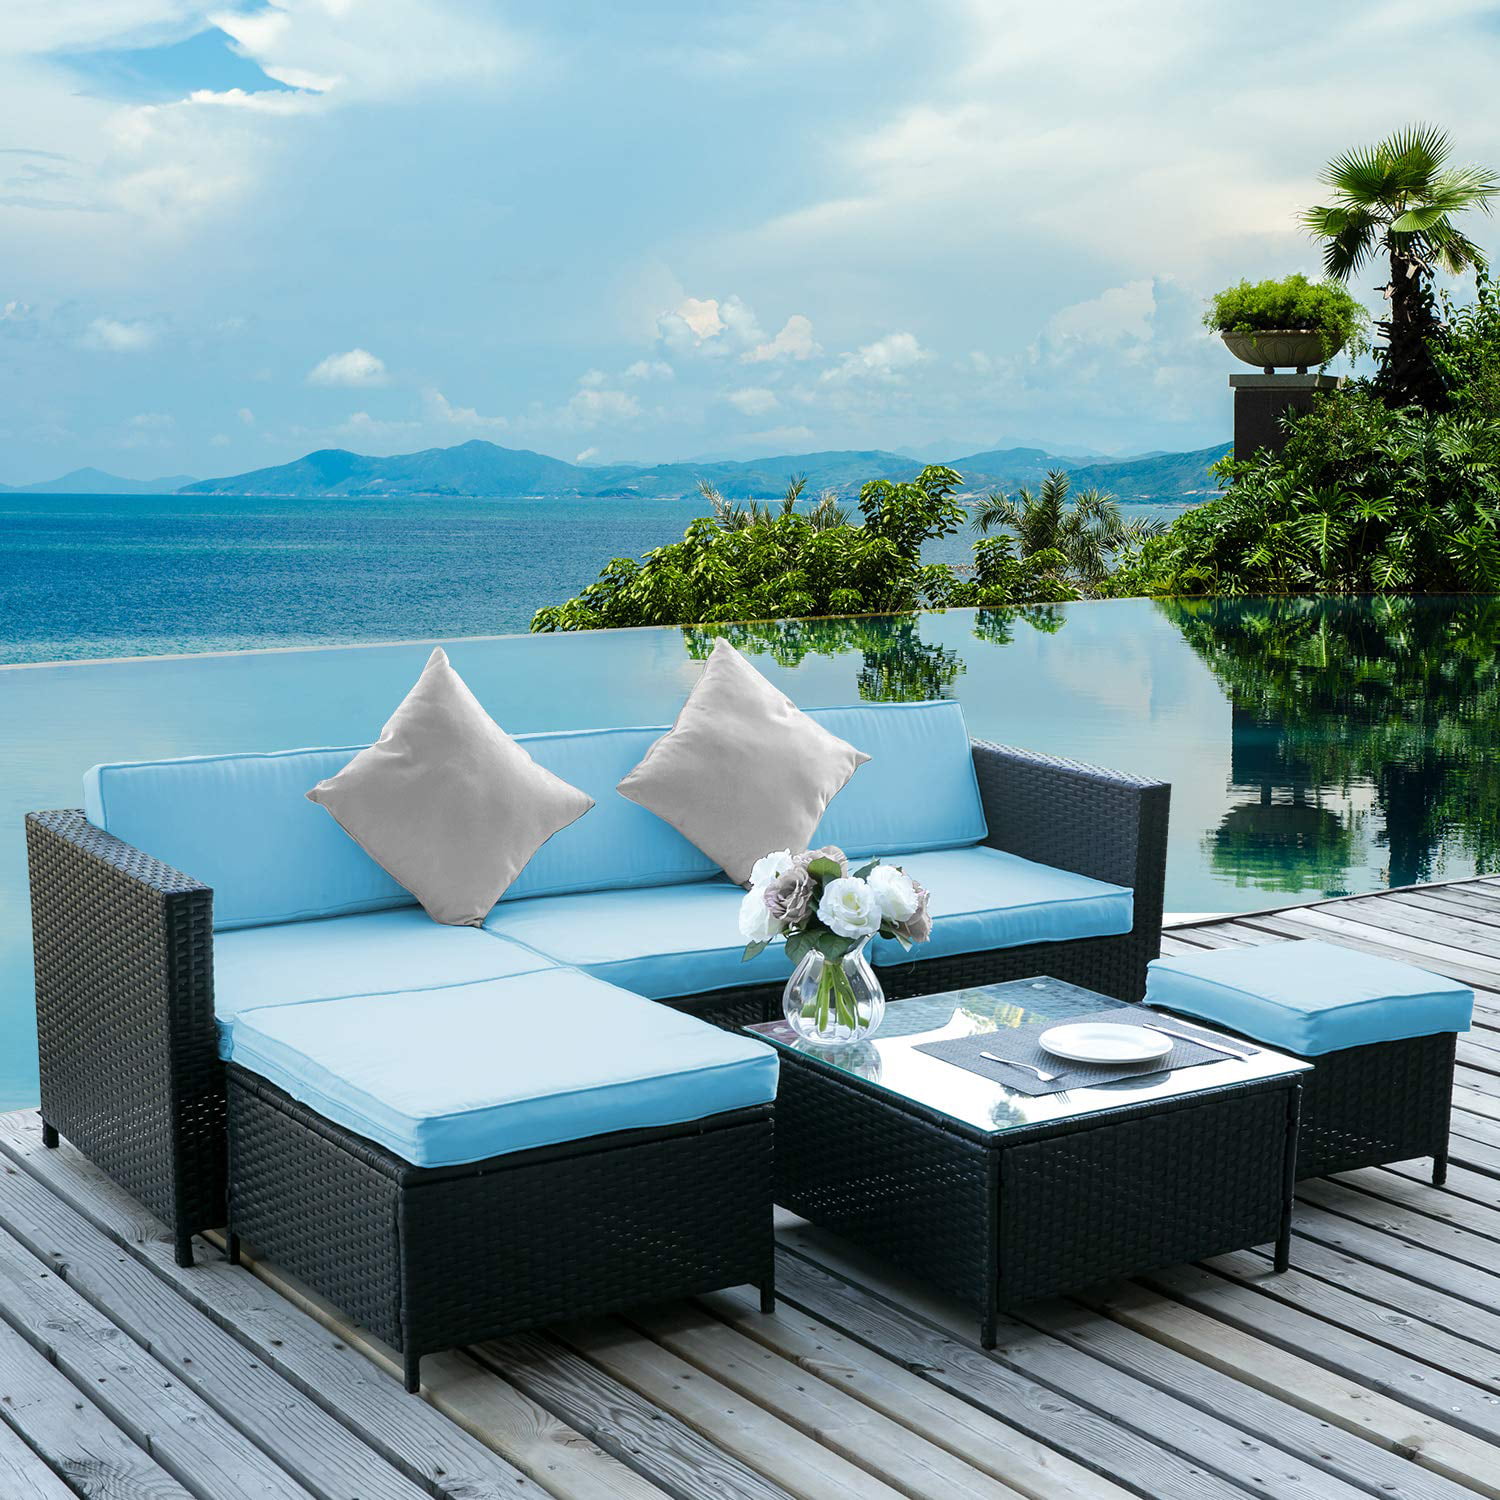 Clearance! 6PCS Outdoor Patio Furniture, All-Weather Wicker Patio Set